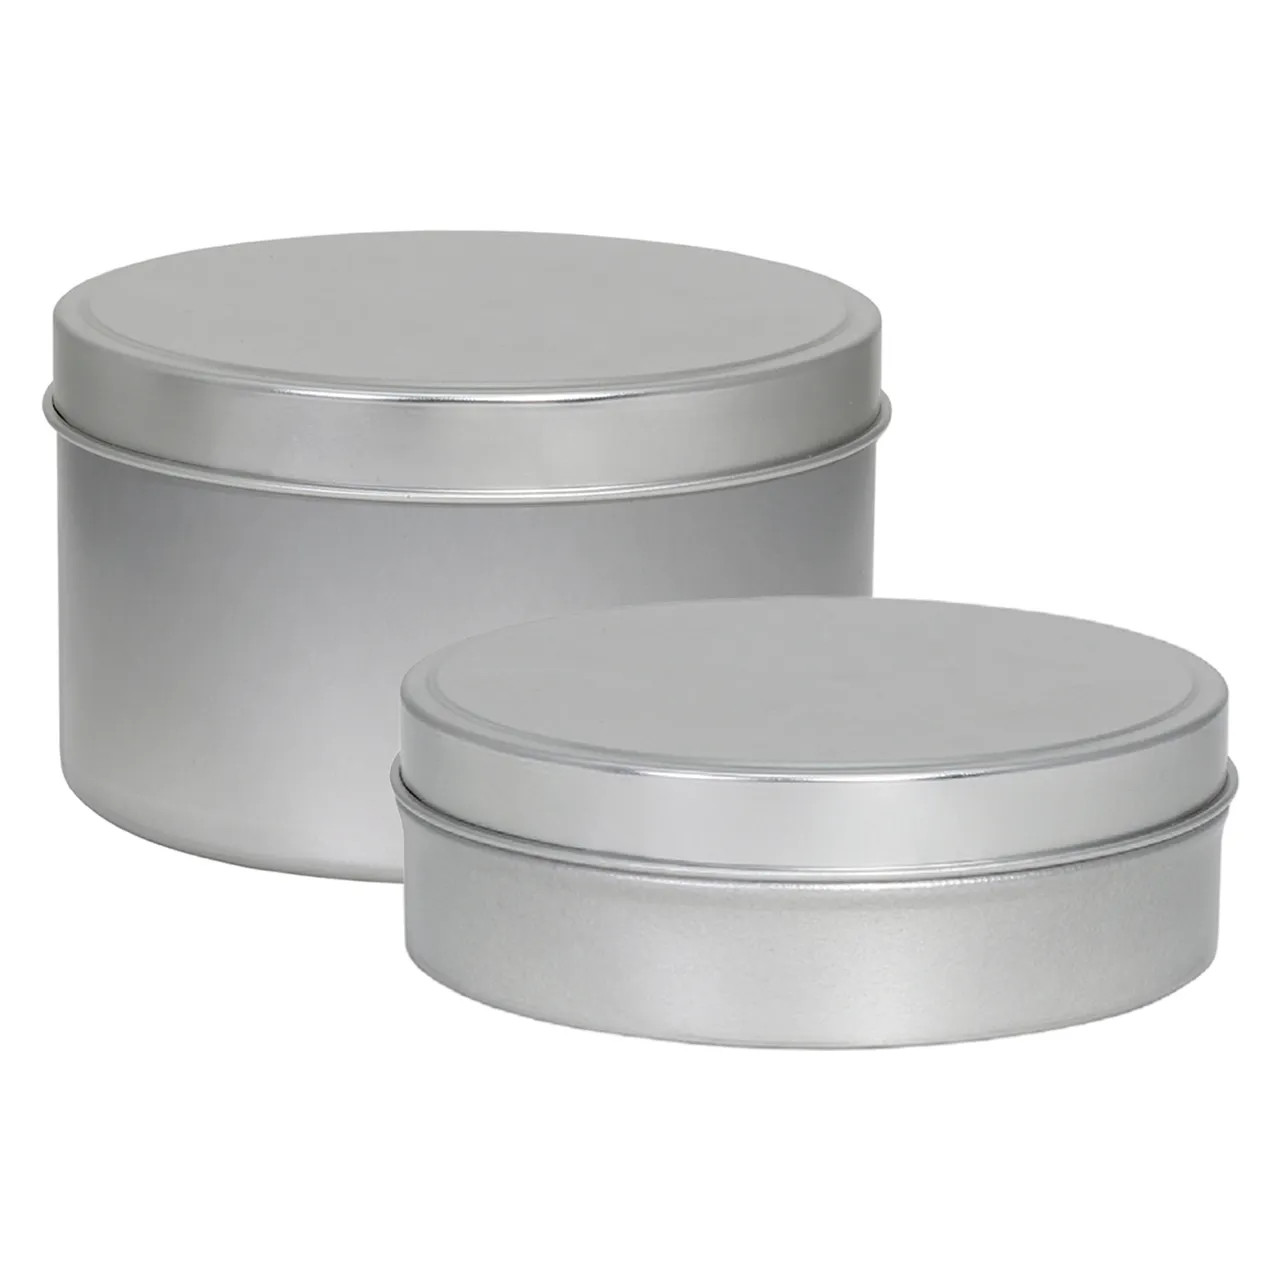 Seamless 8 Oz Deep Round Tin Can - Best Containers